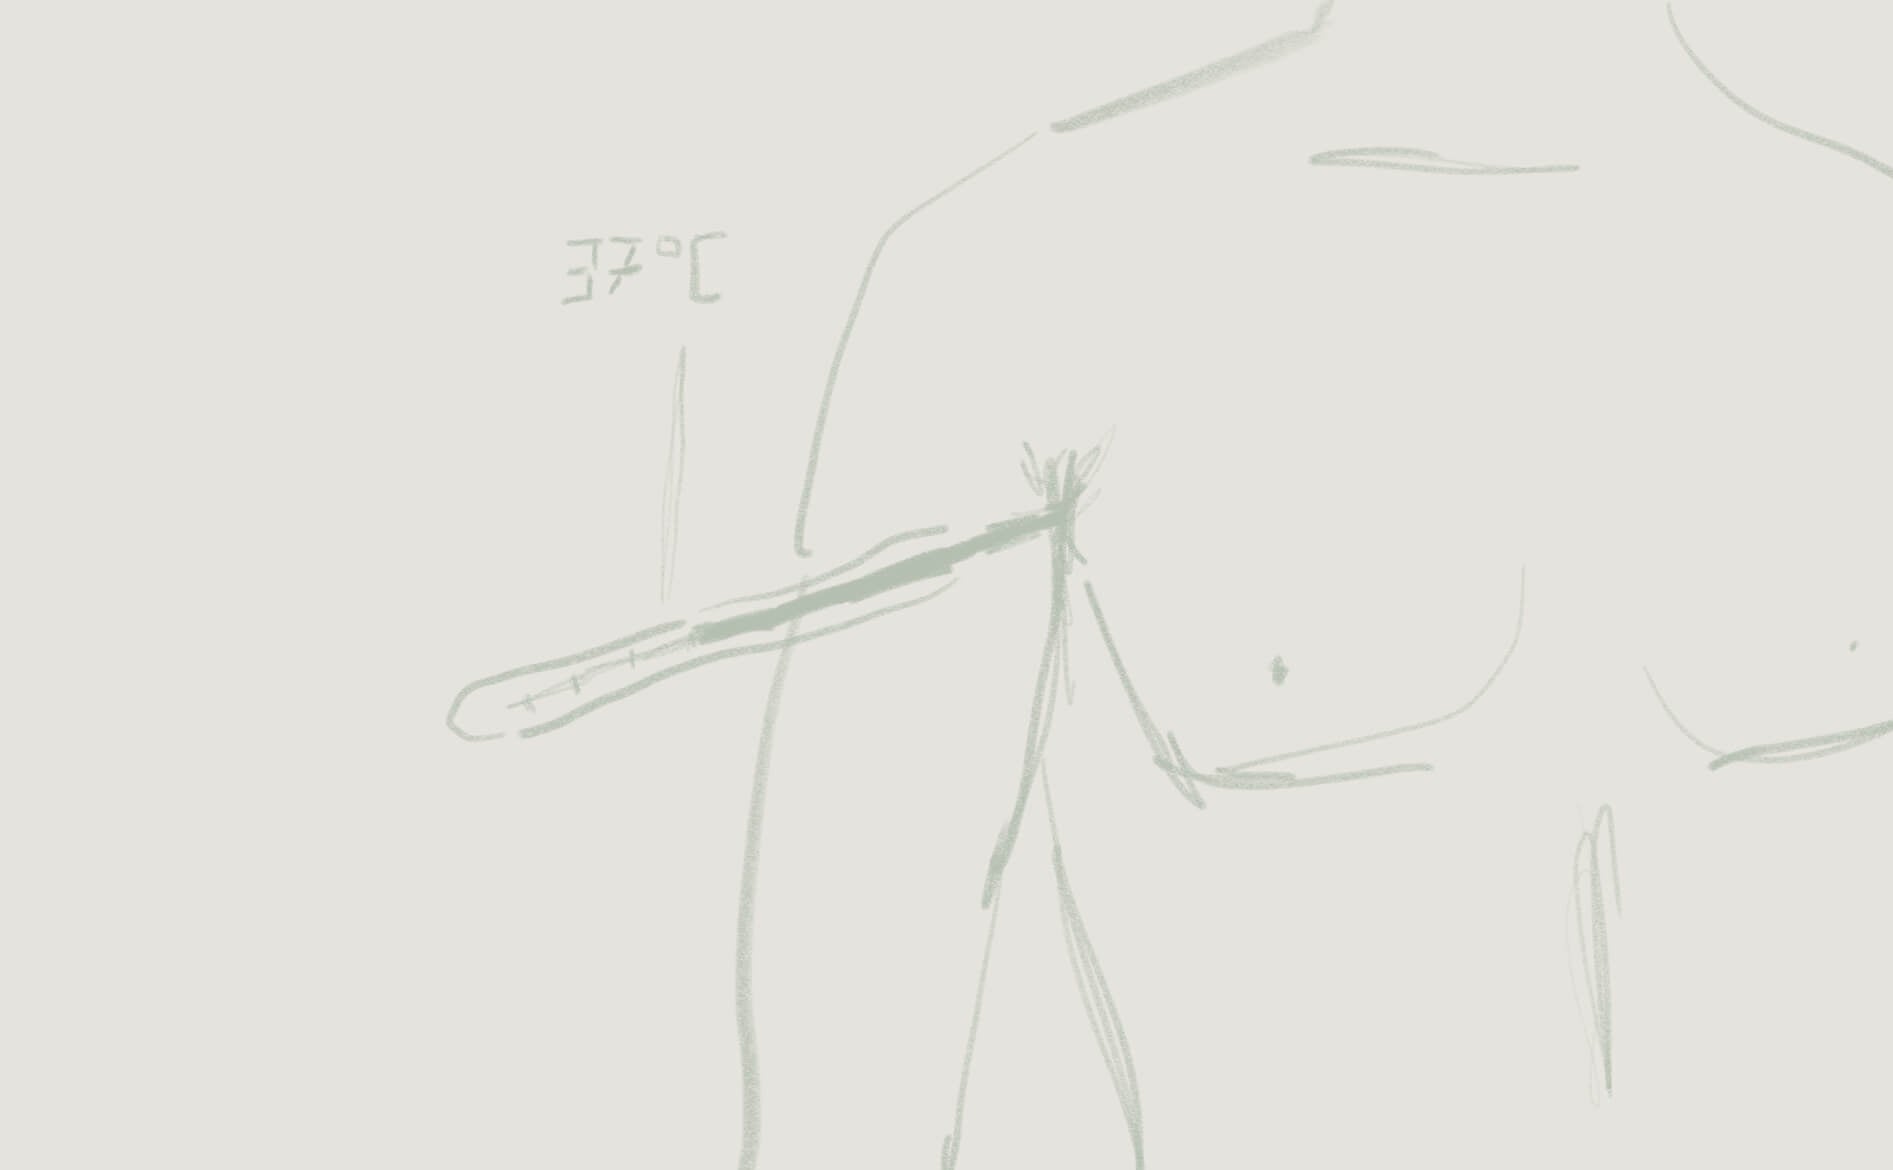 Drawing of upper body with thermometer showing 37°C